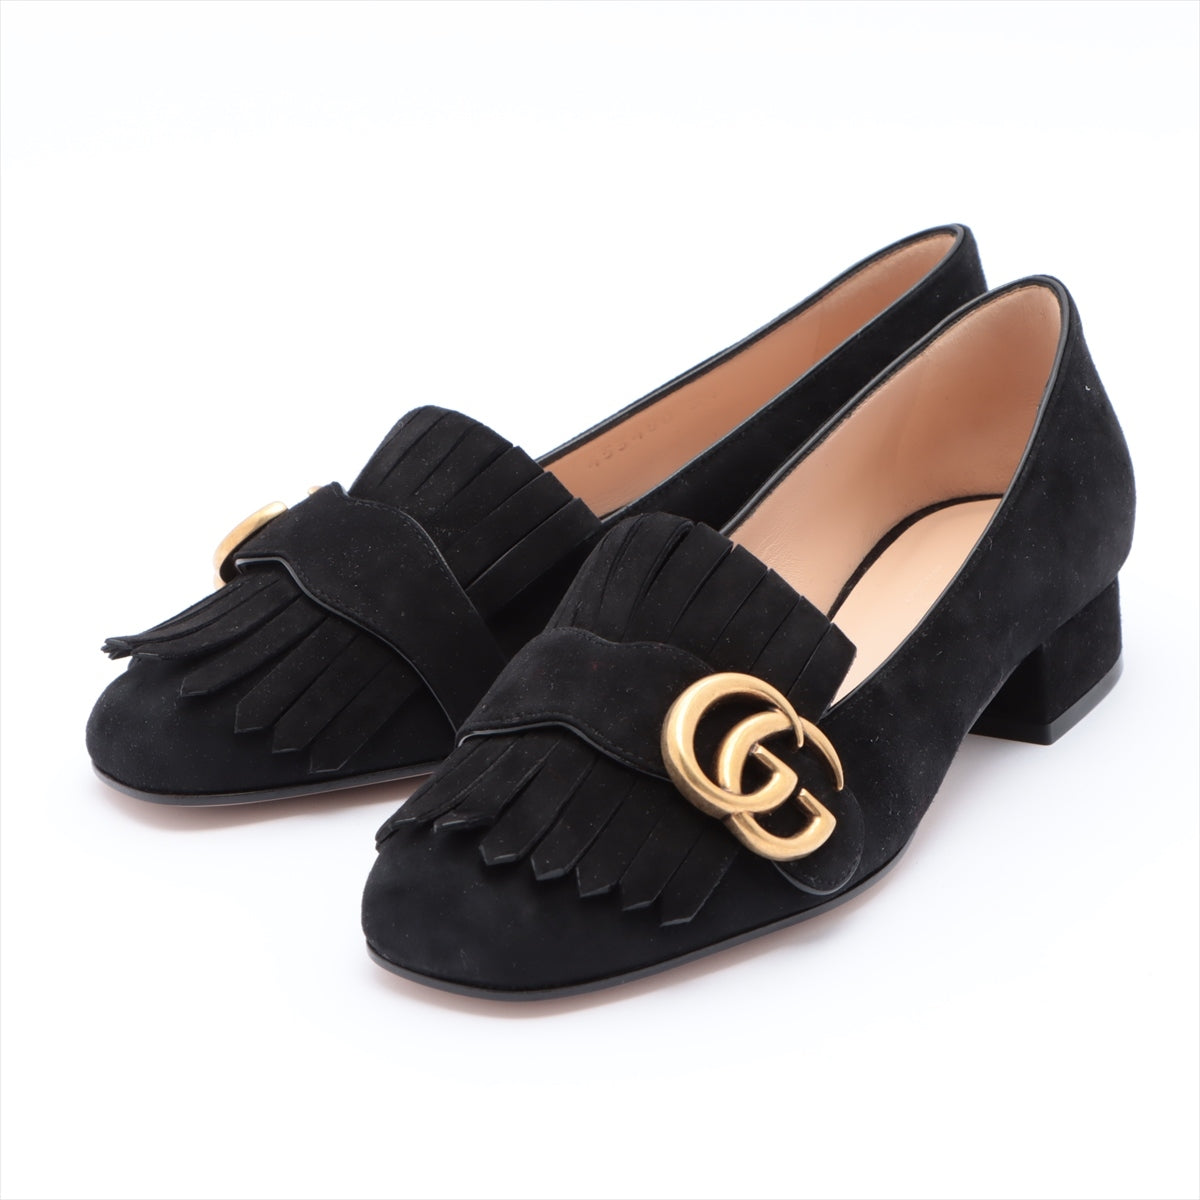 Gucci GG Marmont Suede Loafer 34 Ladies' Black 453480